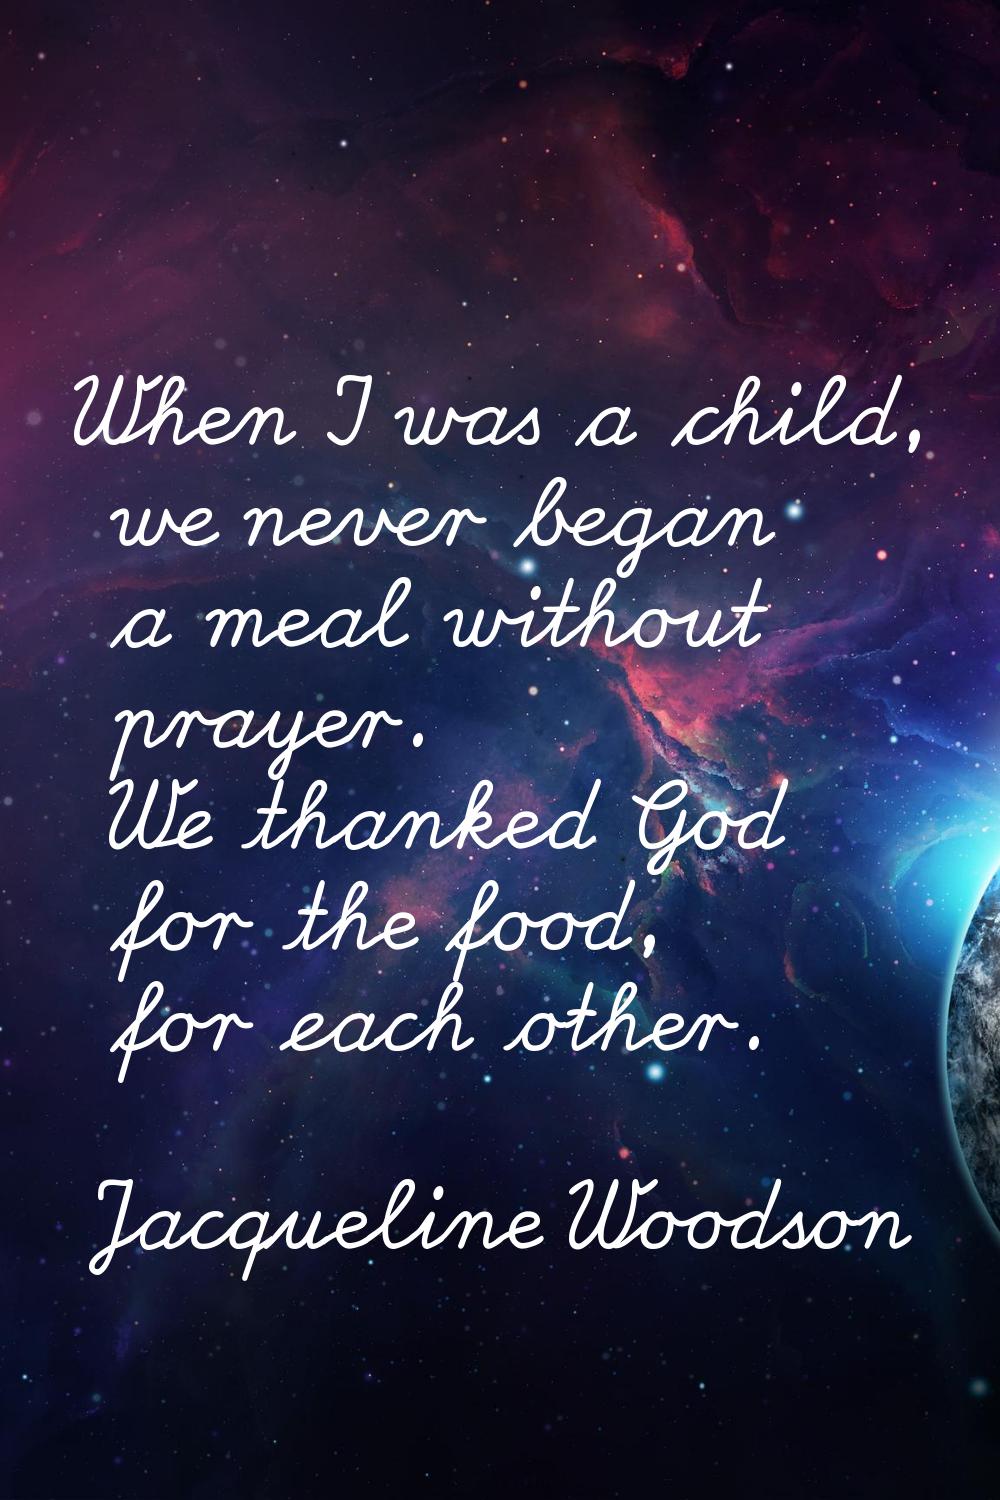 When I was a child, we never began a meal without prayer. We thanked God for the food, for each oth